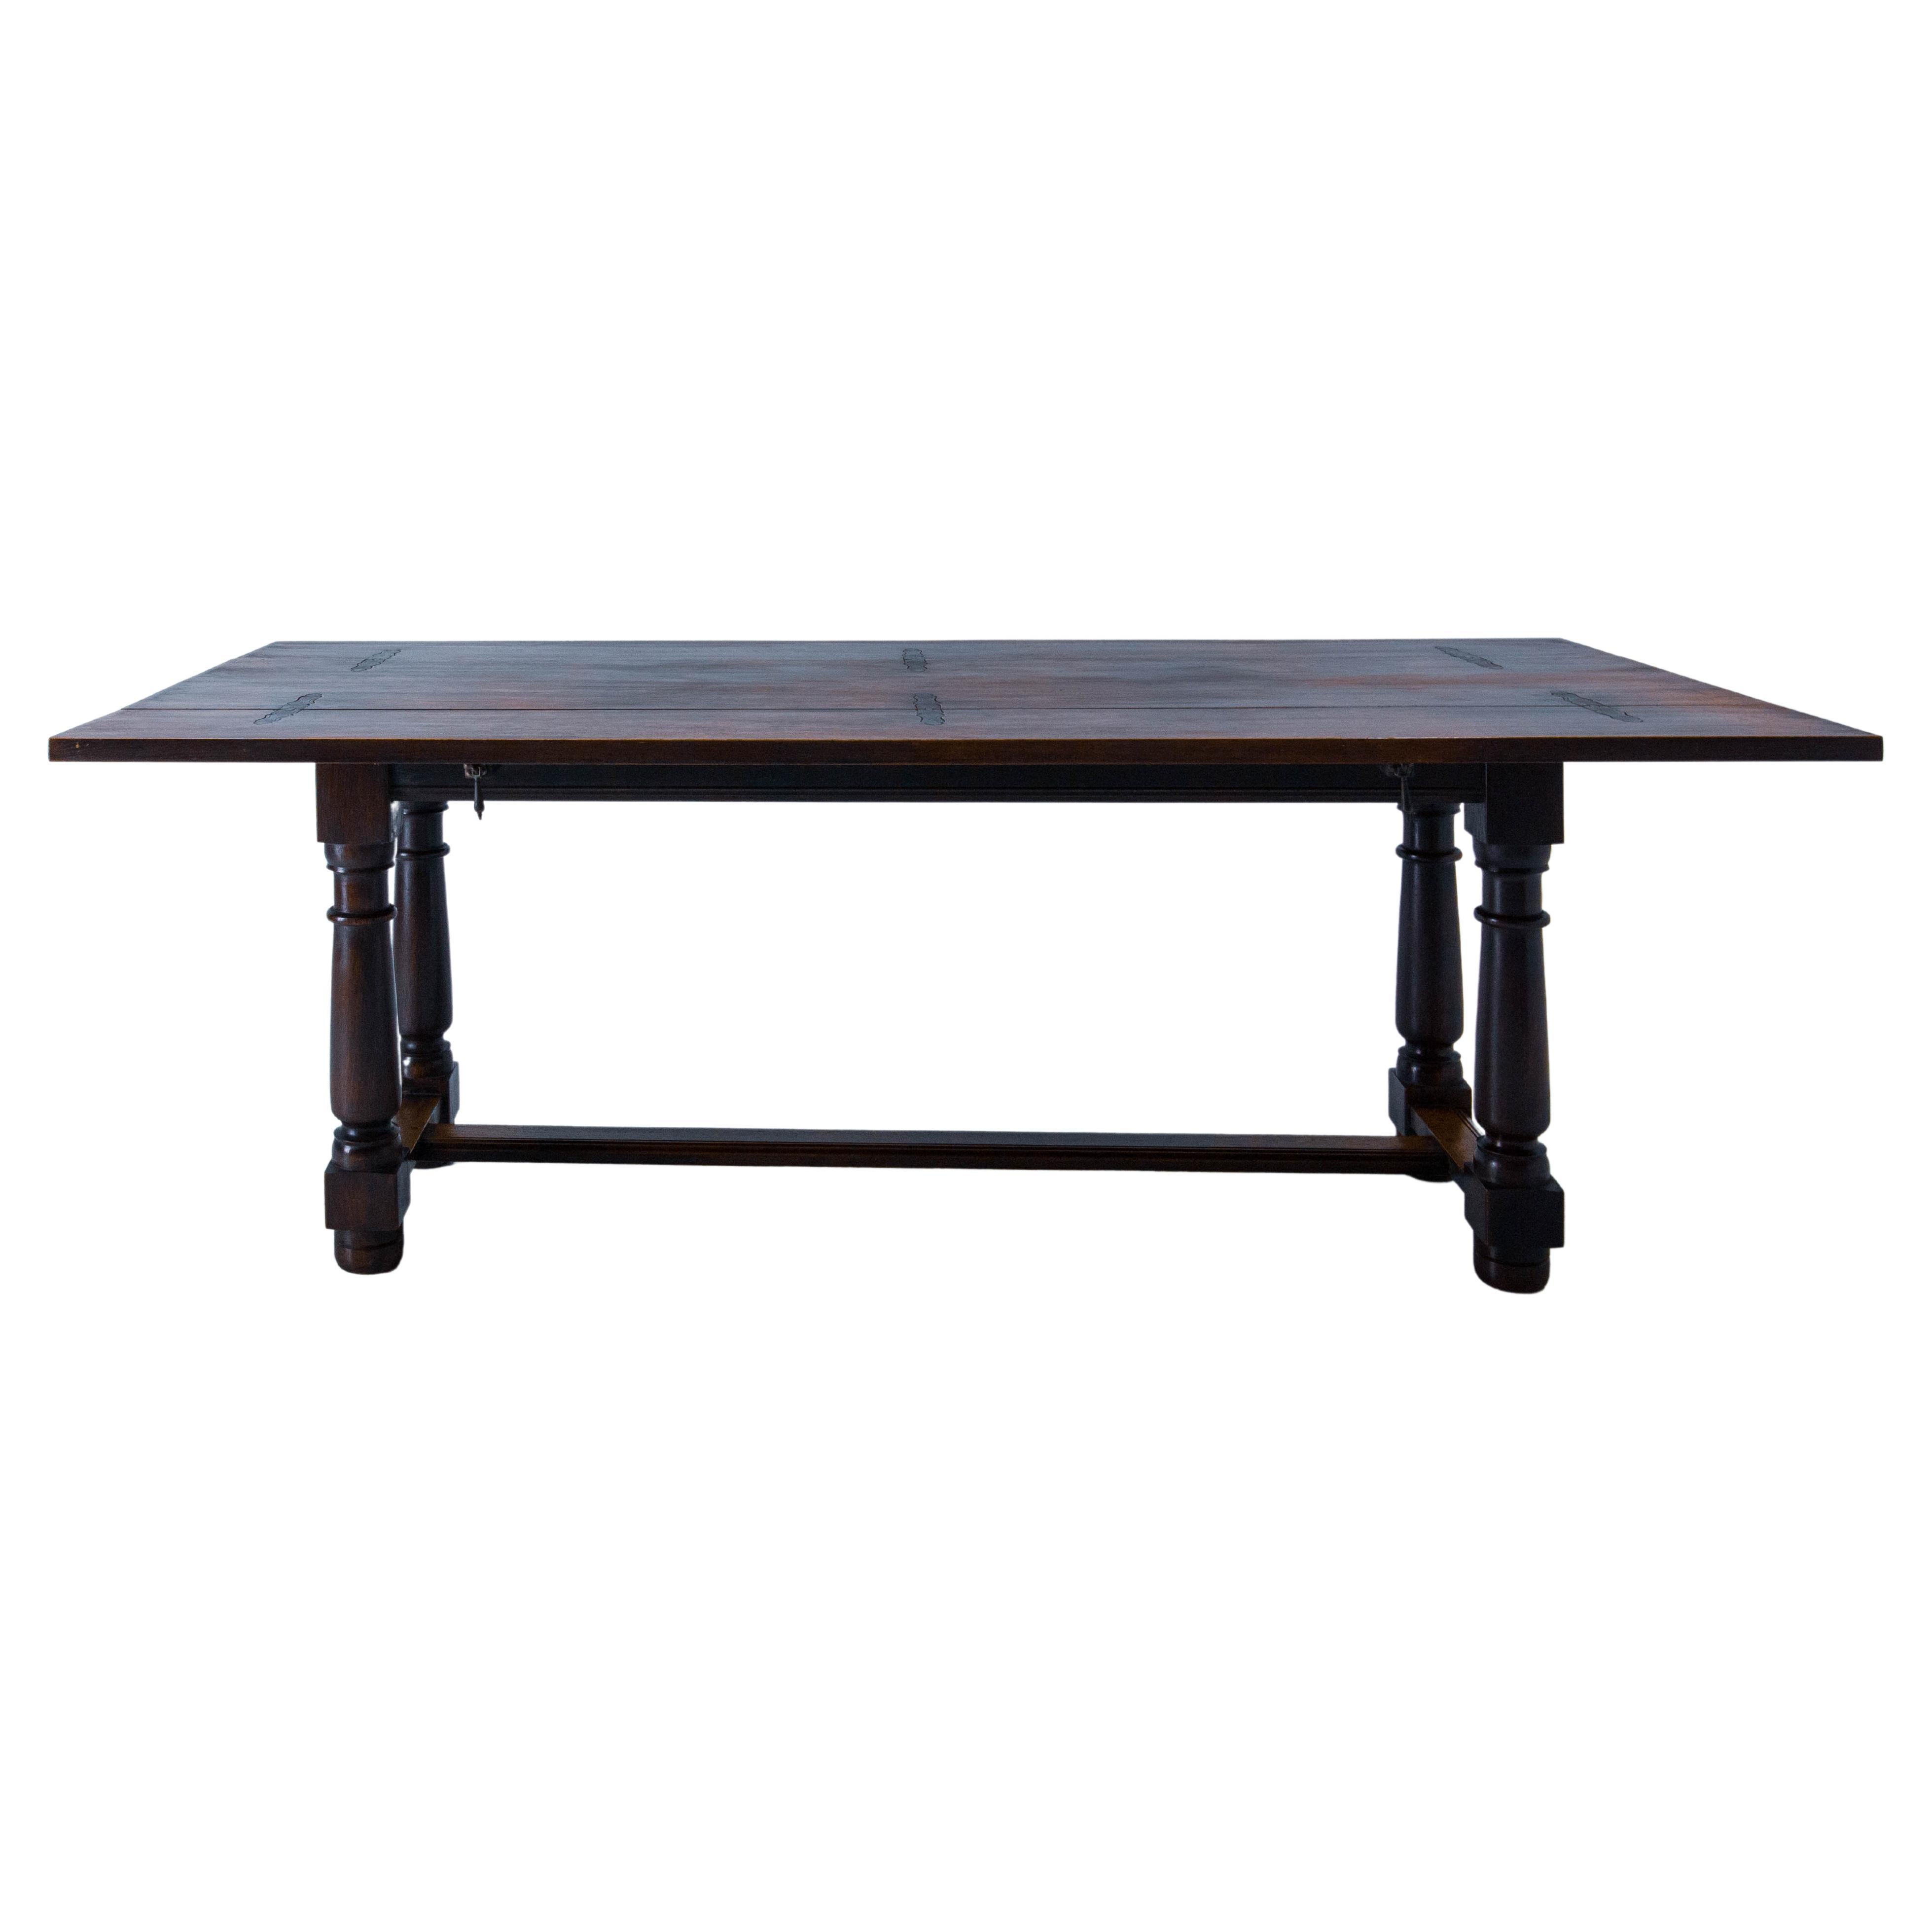 Spanish dining table
Oak and wrought iron
The foldable lengthwise allows the transformation into a console table
Good vintage condition, with minor signs of wear, use and age which make all its character.

Shipping:
L200 P50 H72.5 68 Kg.

  